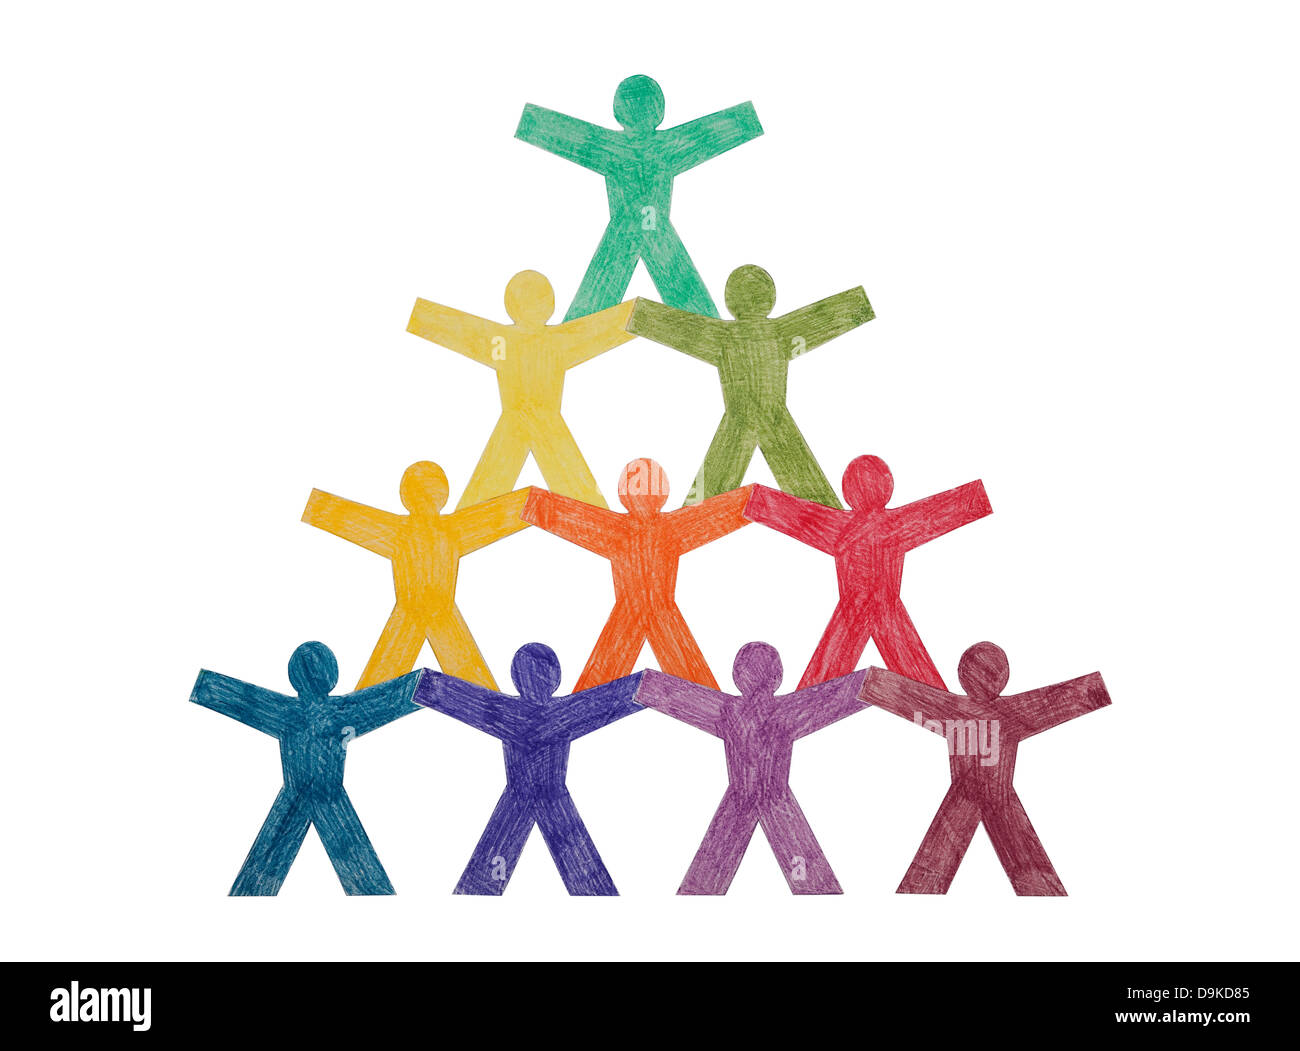 Pyramid of paper cut-out people with clipping path Stock Photo